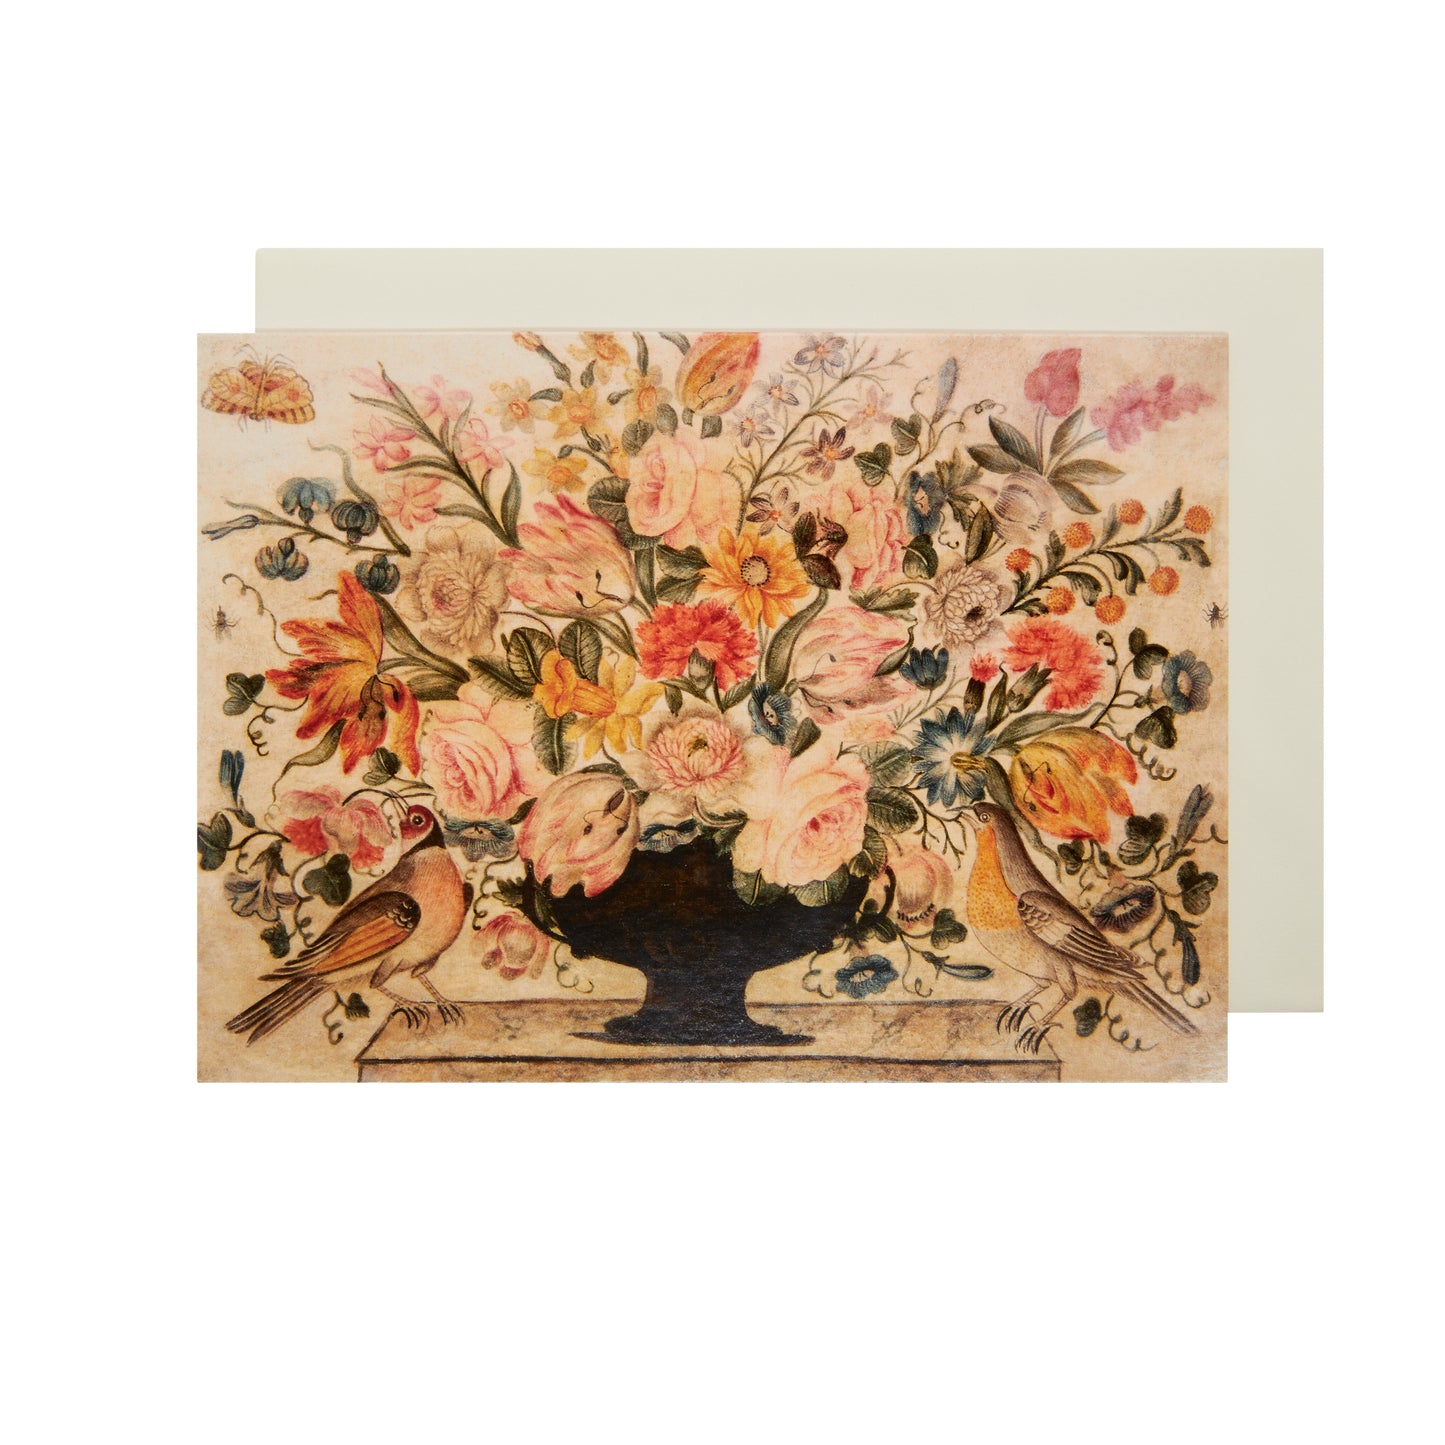 Urn of Flowers - Greeting card